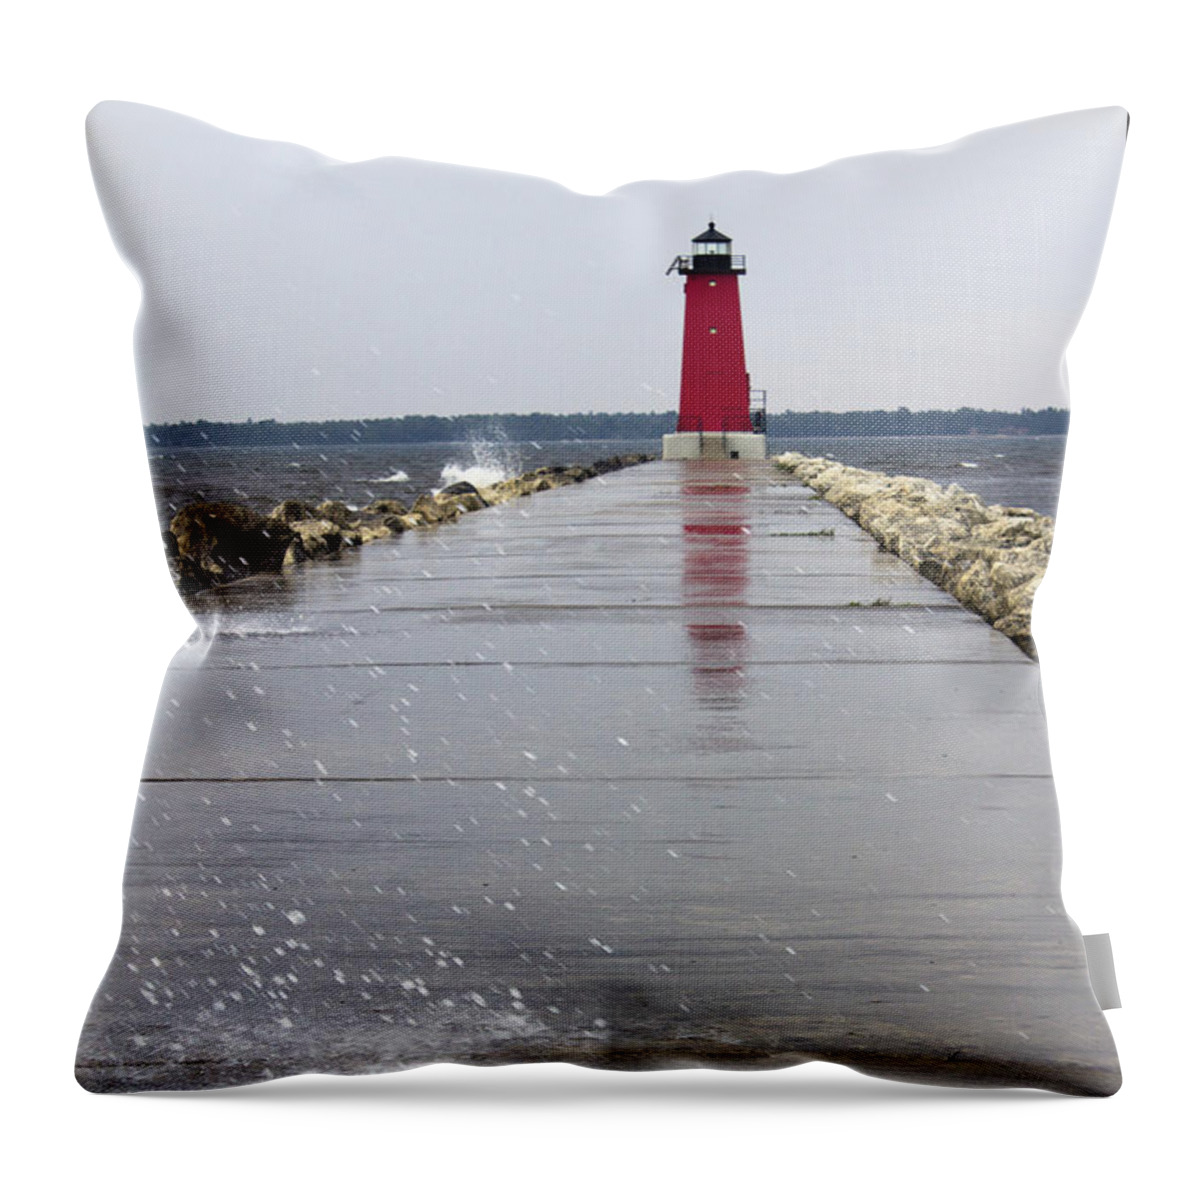 Manistique Throw Pillow featuring the photograph Red Lighthouse by Tara Lynn